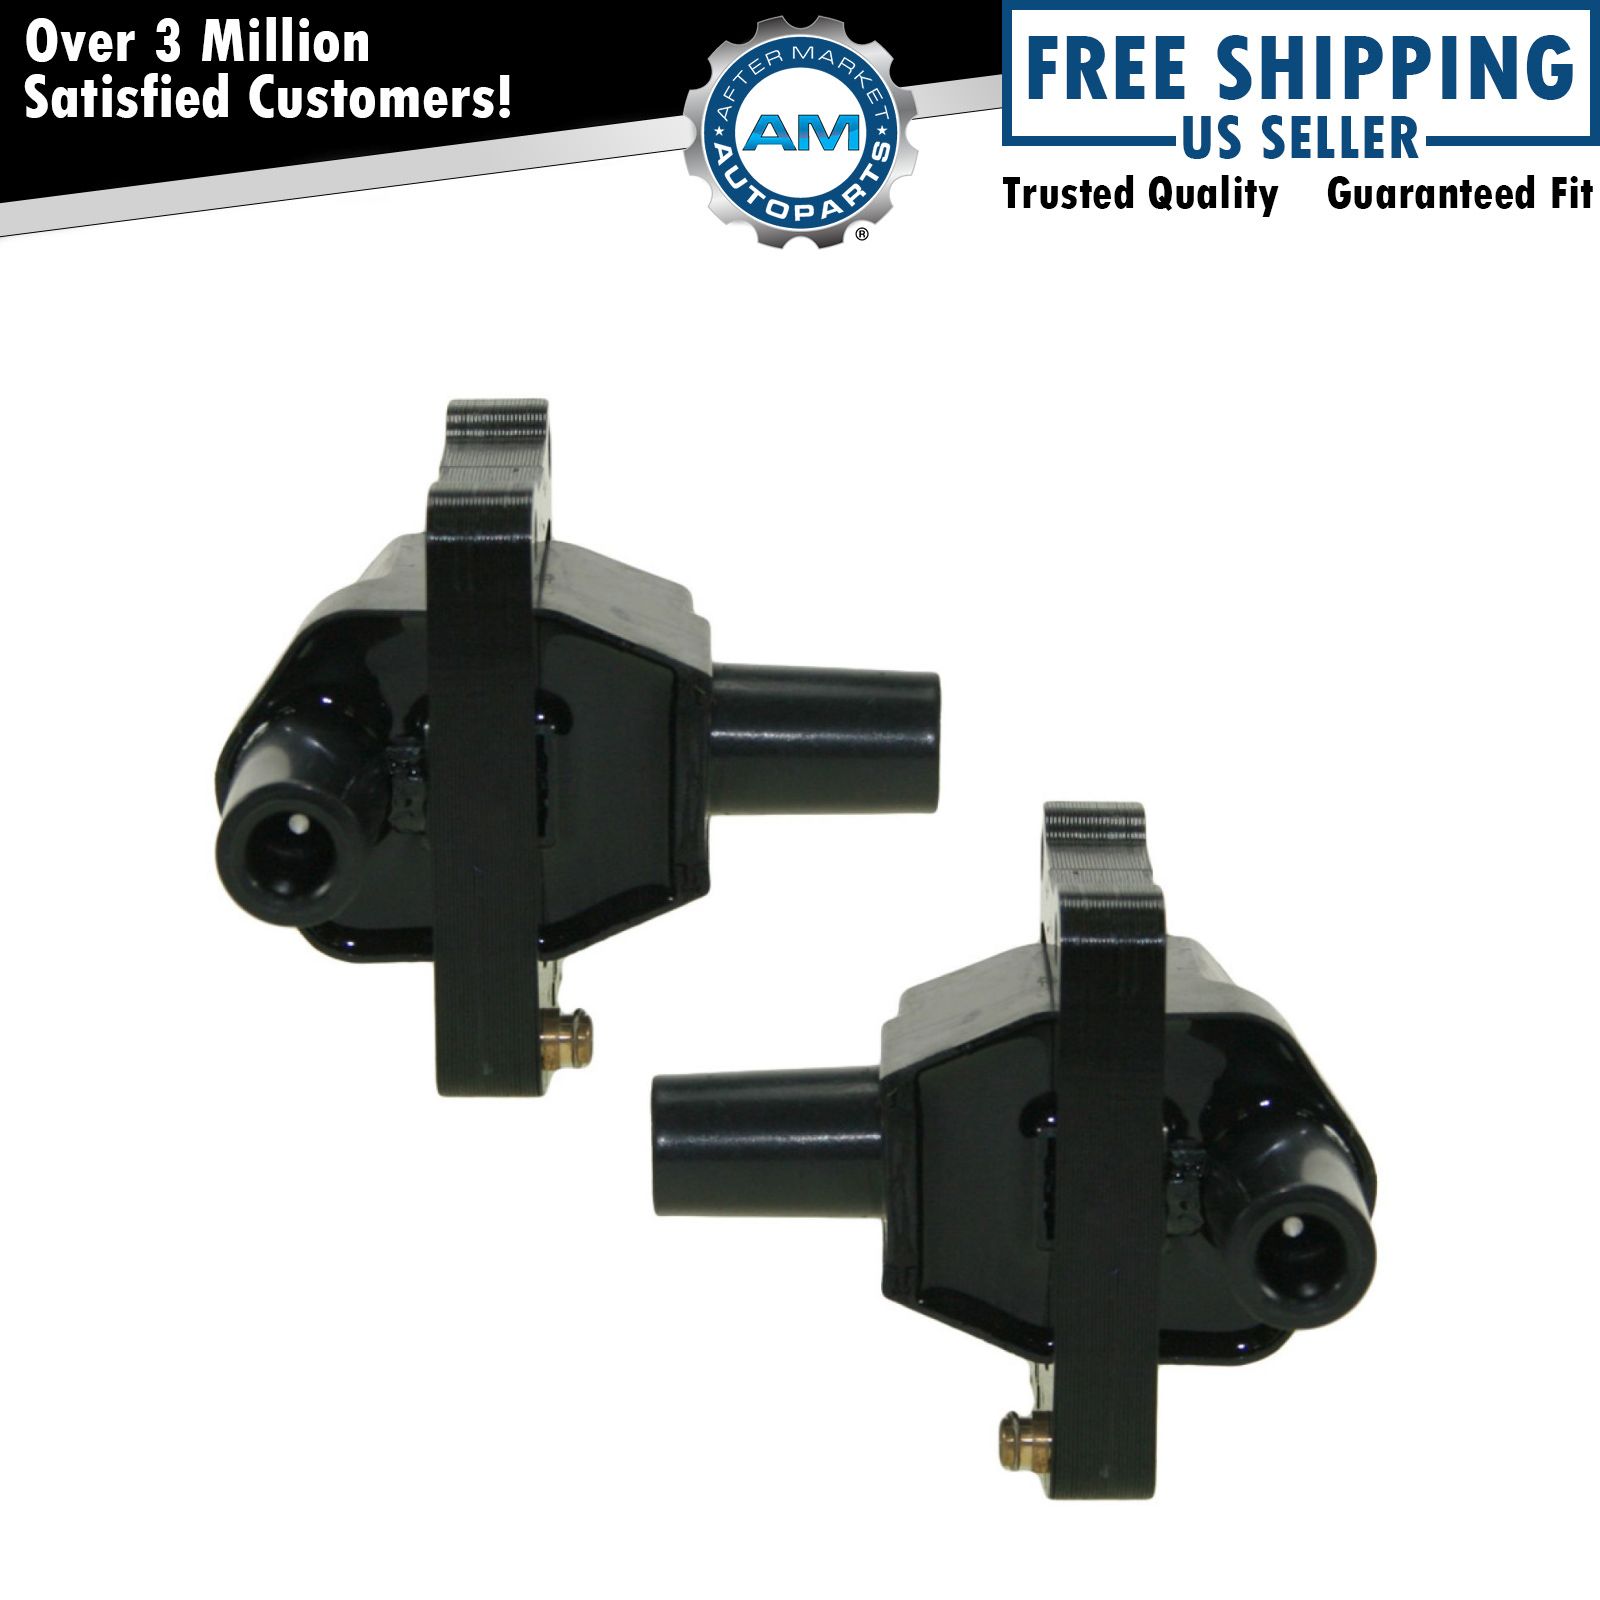 Ignition Coil Pair Set of 2 for Mercedes Benz E320 S320 SL320 300 C230 C280 NEW